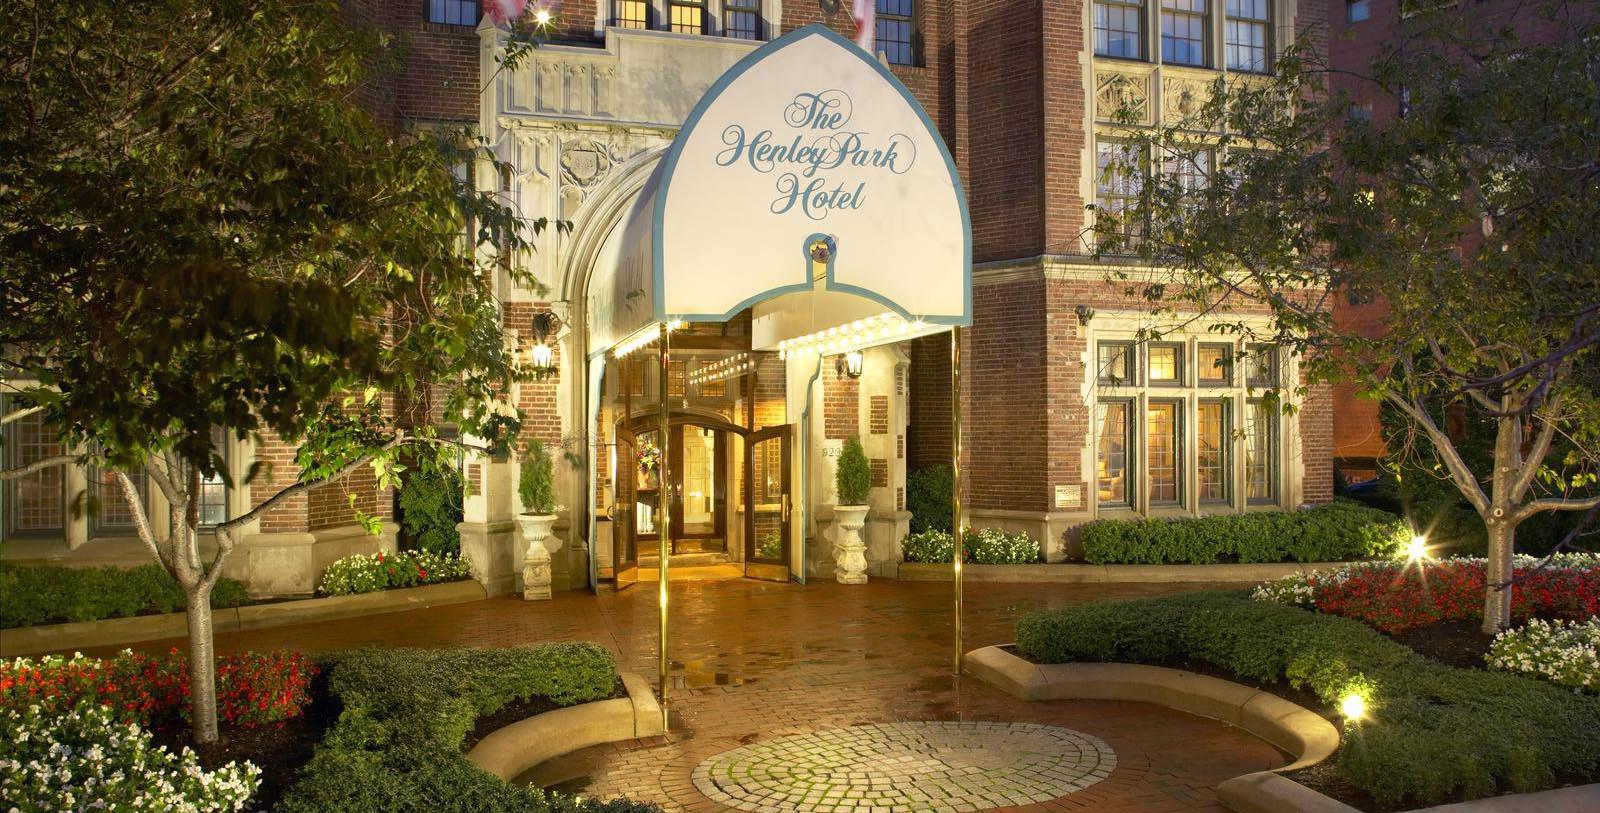 Image of Entrance The Henley Park Hotel, 1948, Member of Historic Hotels of America, in Washington, DC, Special Offers, Discounted Rates, Families, Romantic Escape, Honeymoons, Anniversaries, Reunions